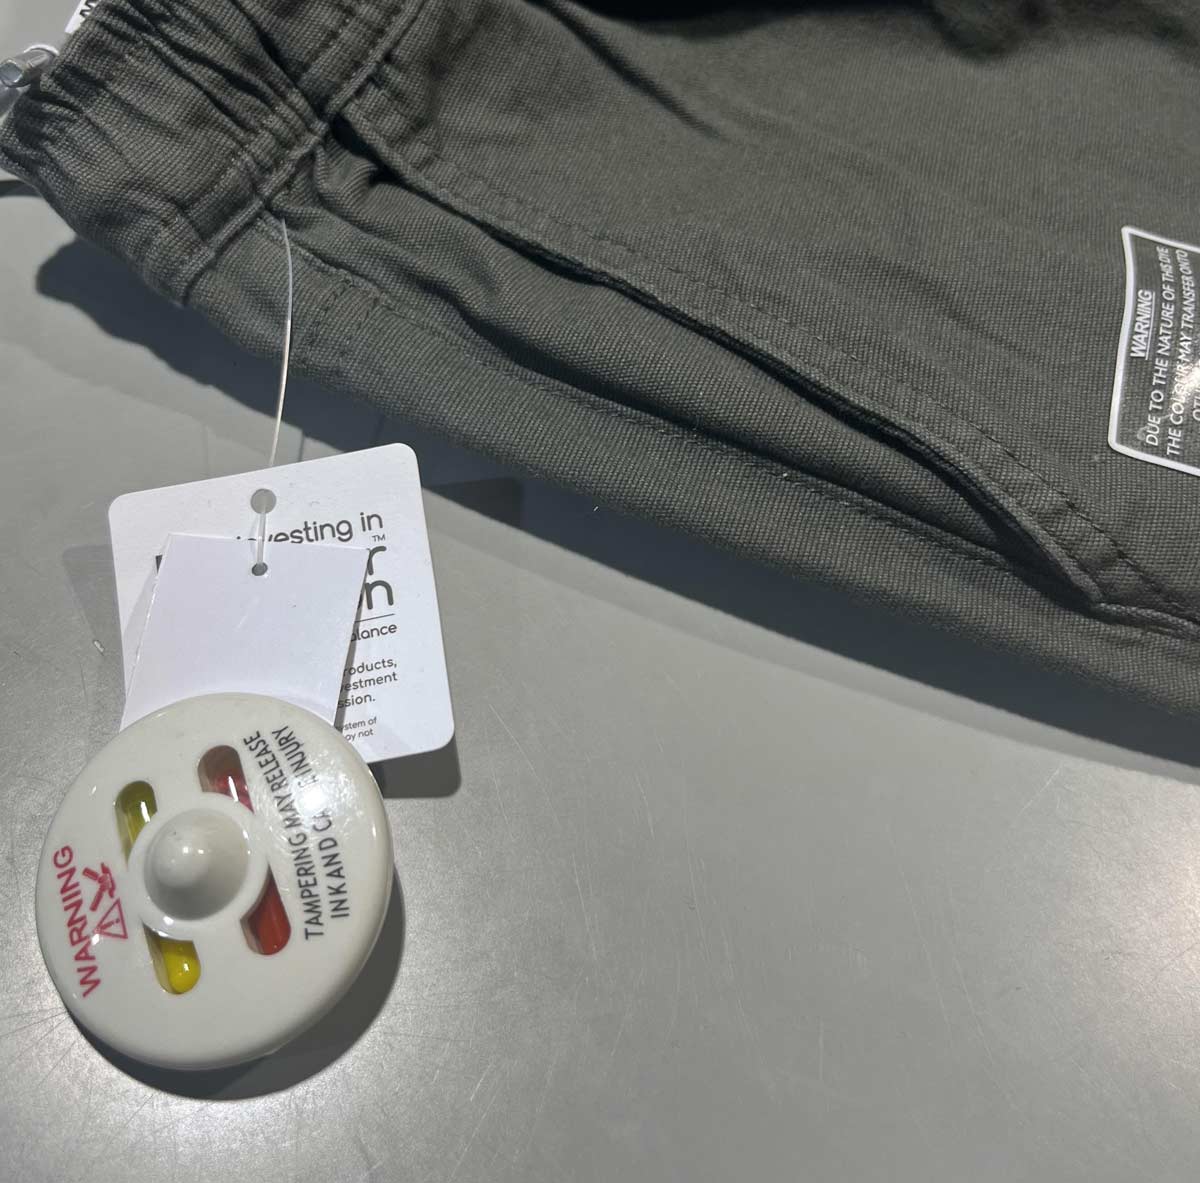 The way my coworker put the anti-theft tag on all of the new stock